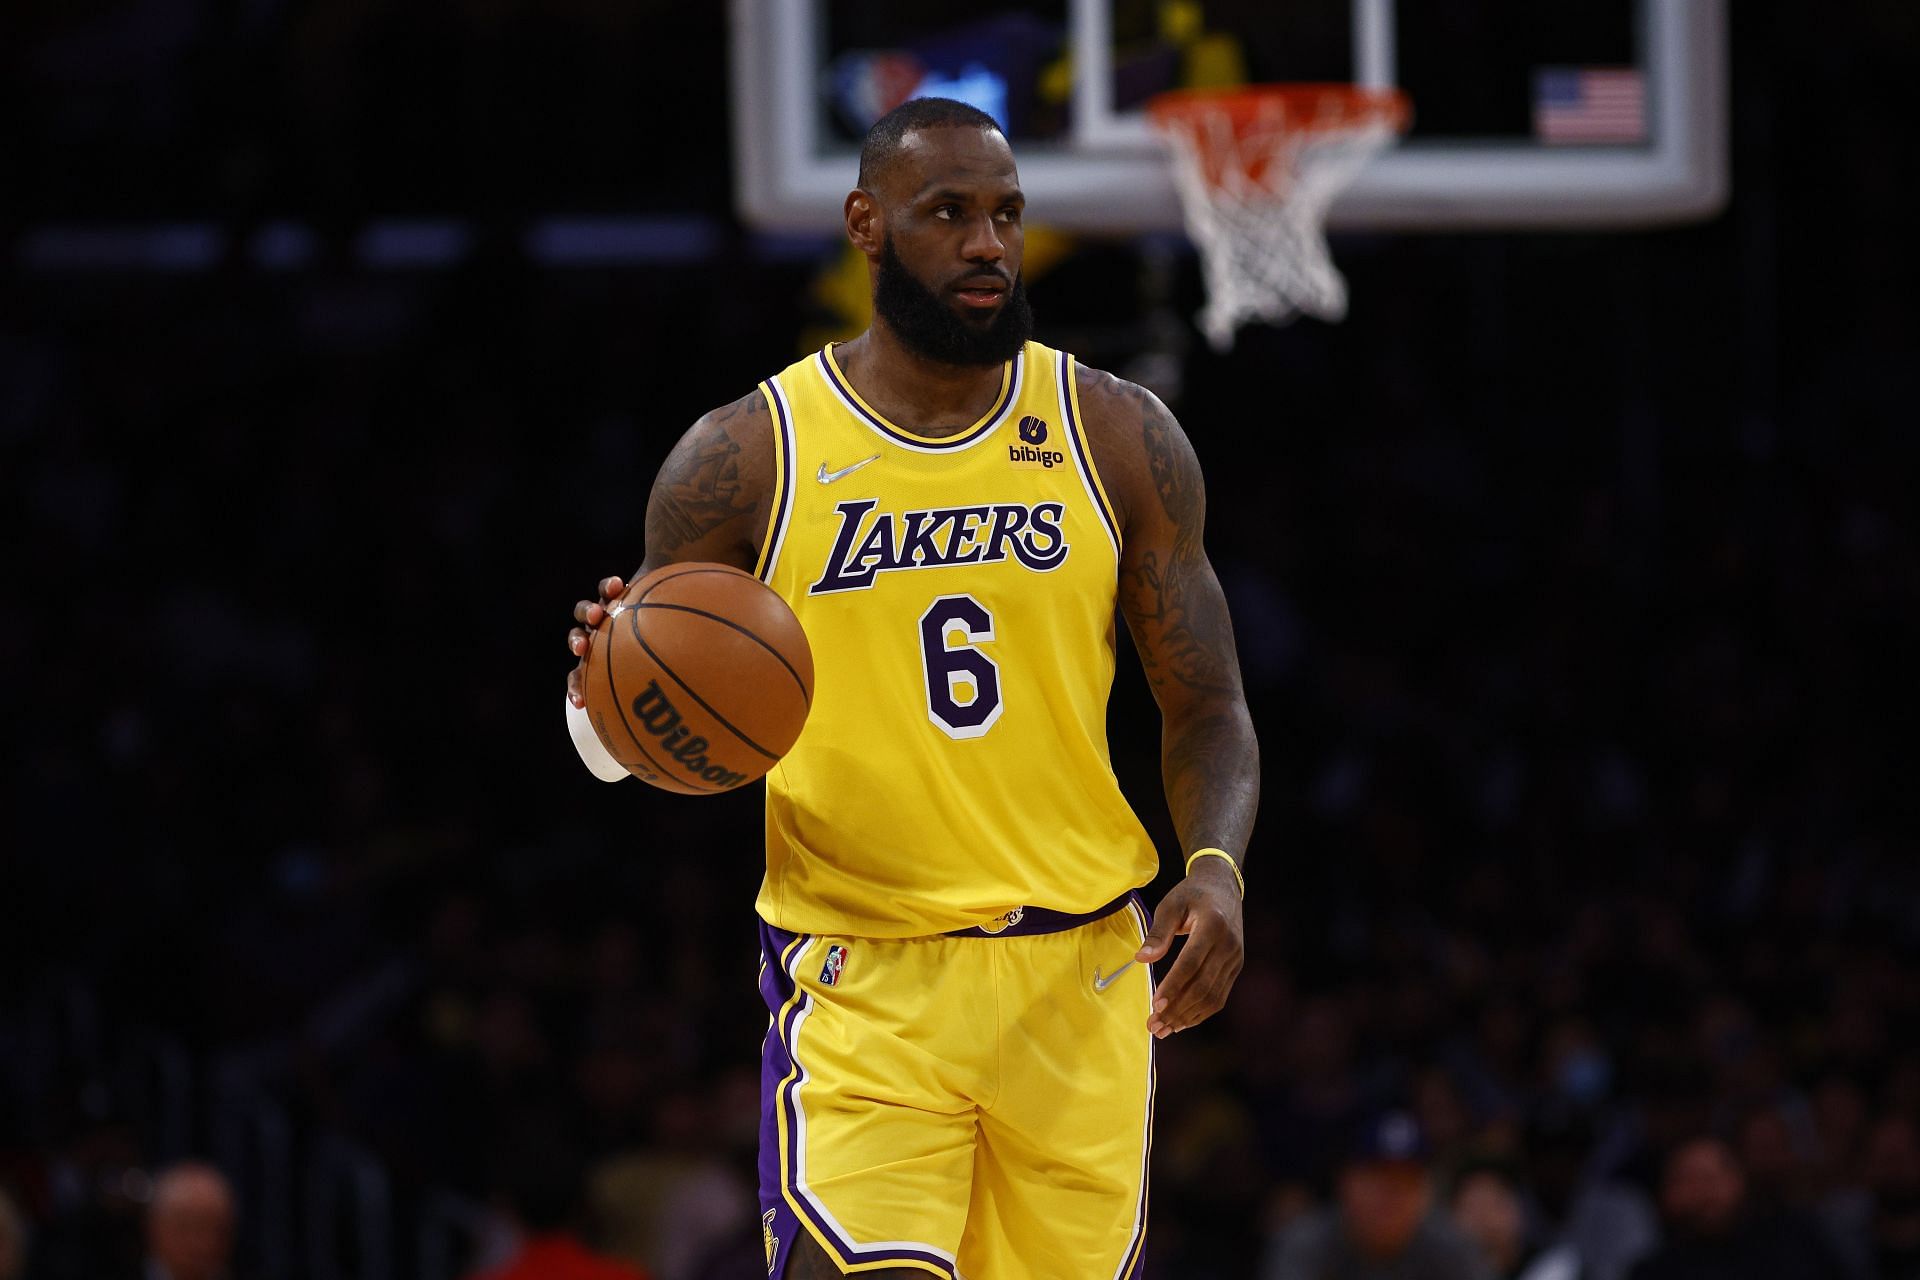 LeBron James #6 of the Los Angeles Lakers at Crypto.com Arena on March 01, 2022 in Los Angeles, California LeBron James #6 of Team LeBron looks on against Team Durant during the 2022 NBA All-Star Game at Rocket Mortgage Fieldhouse on February 20, 2022 in Cleveland, Ohio.